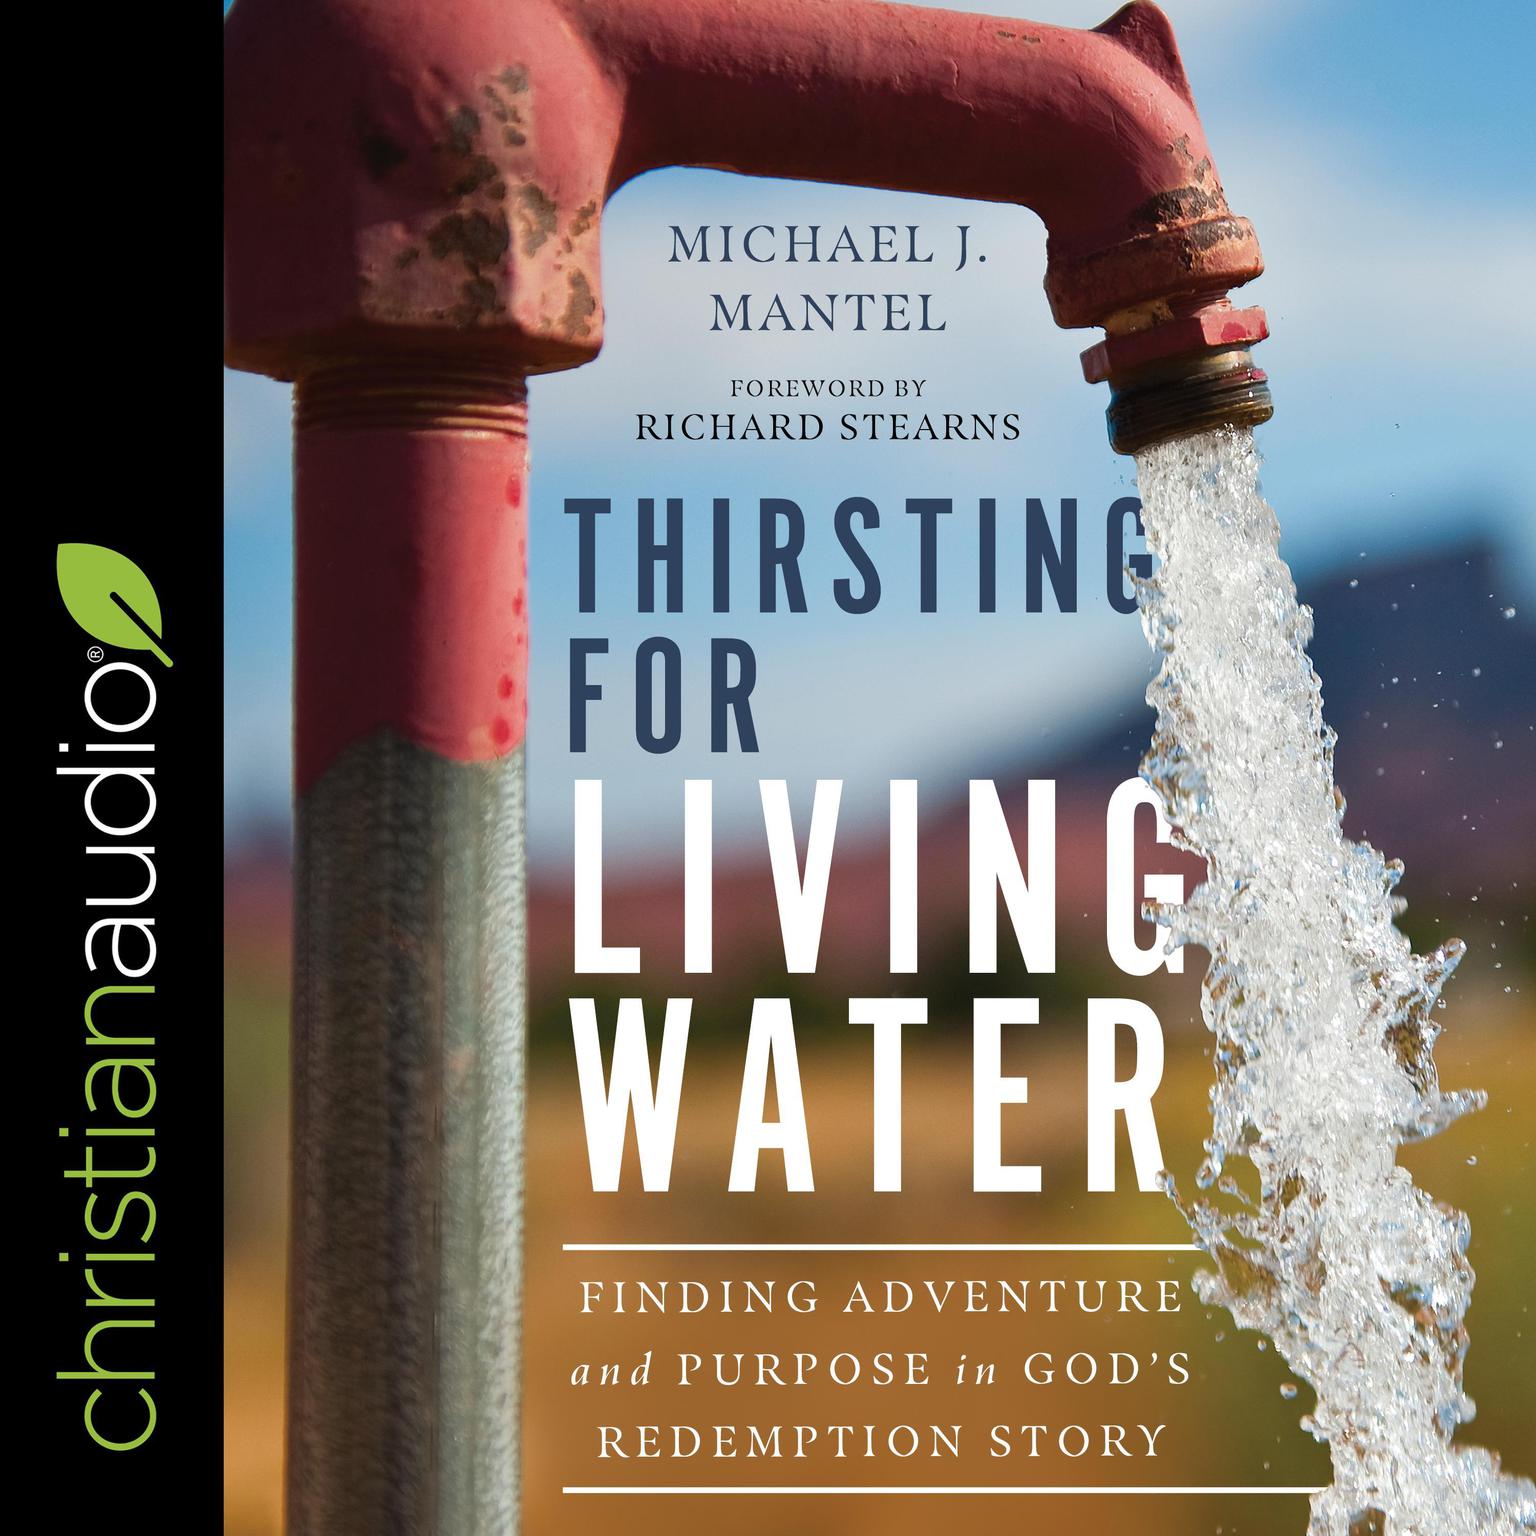 Thirsting for Living Water: Finding Adventure and Purpose in Gods Redemption Story Audiobook, by Michael Mantel